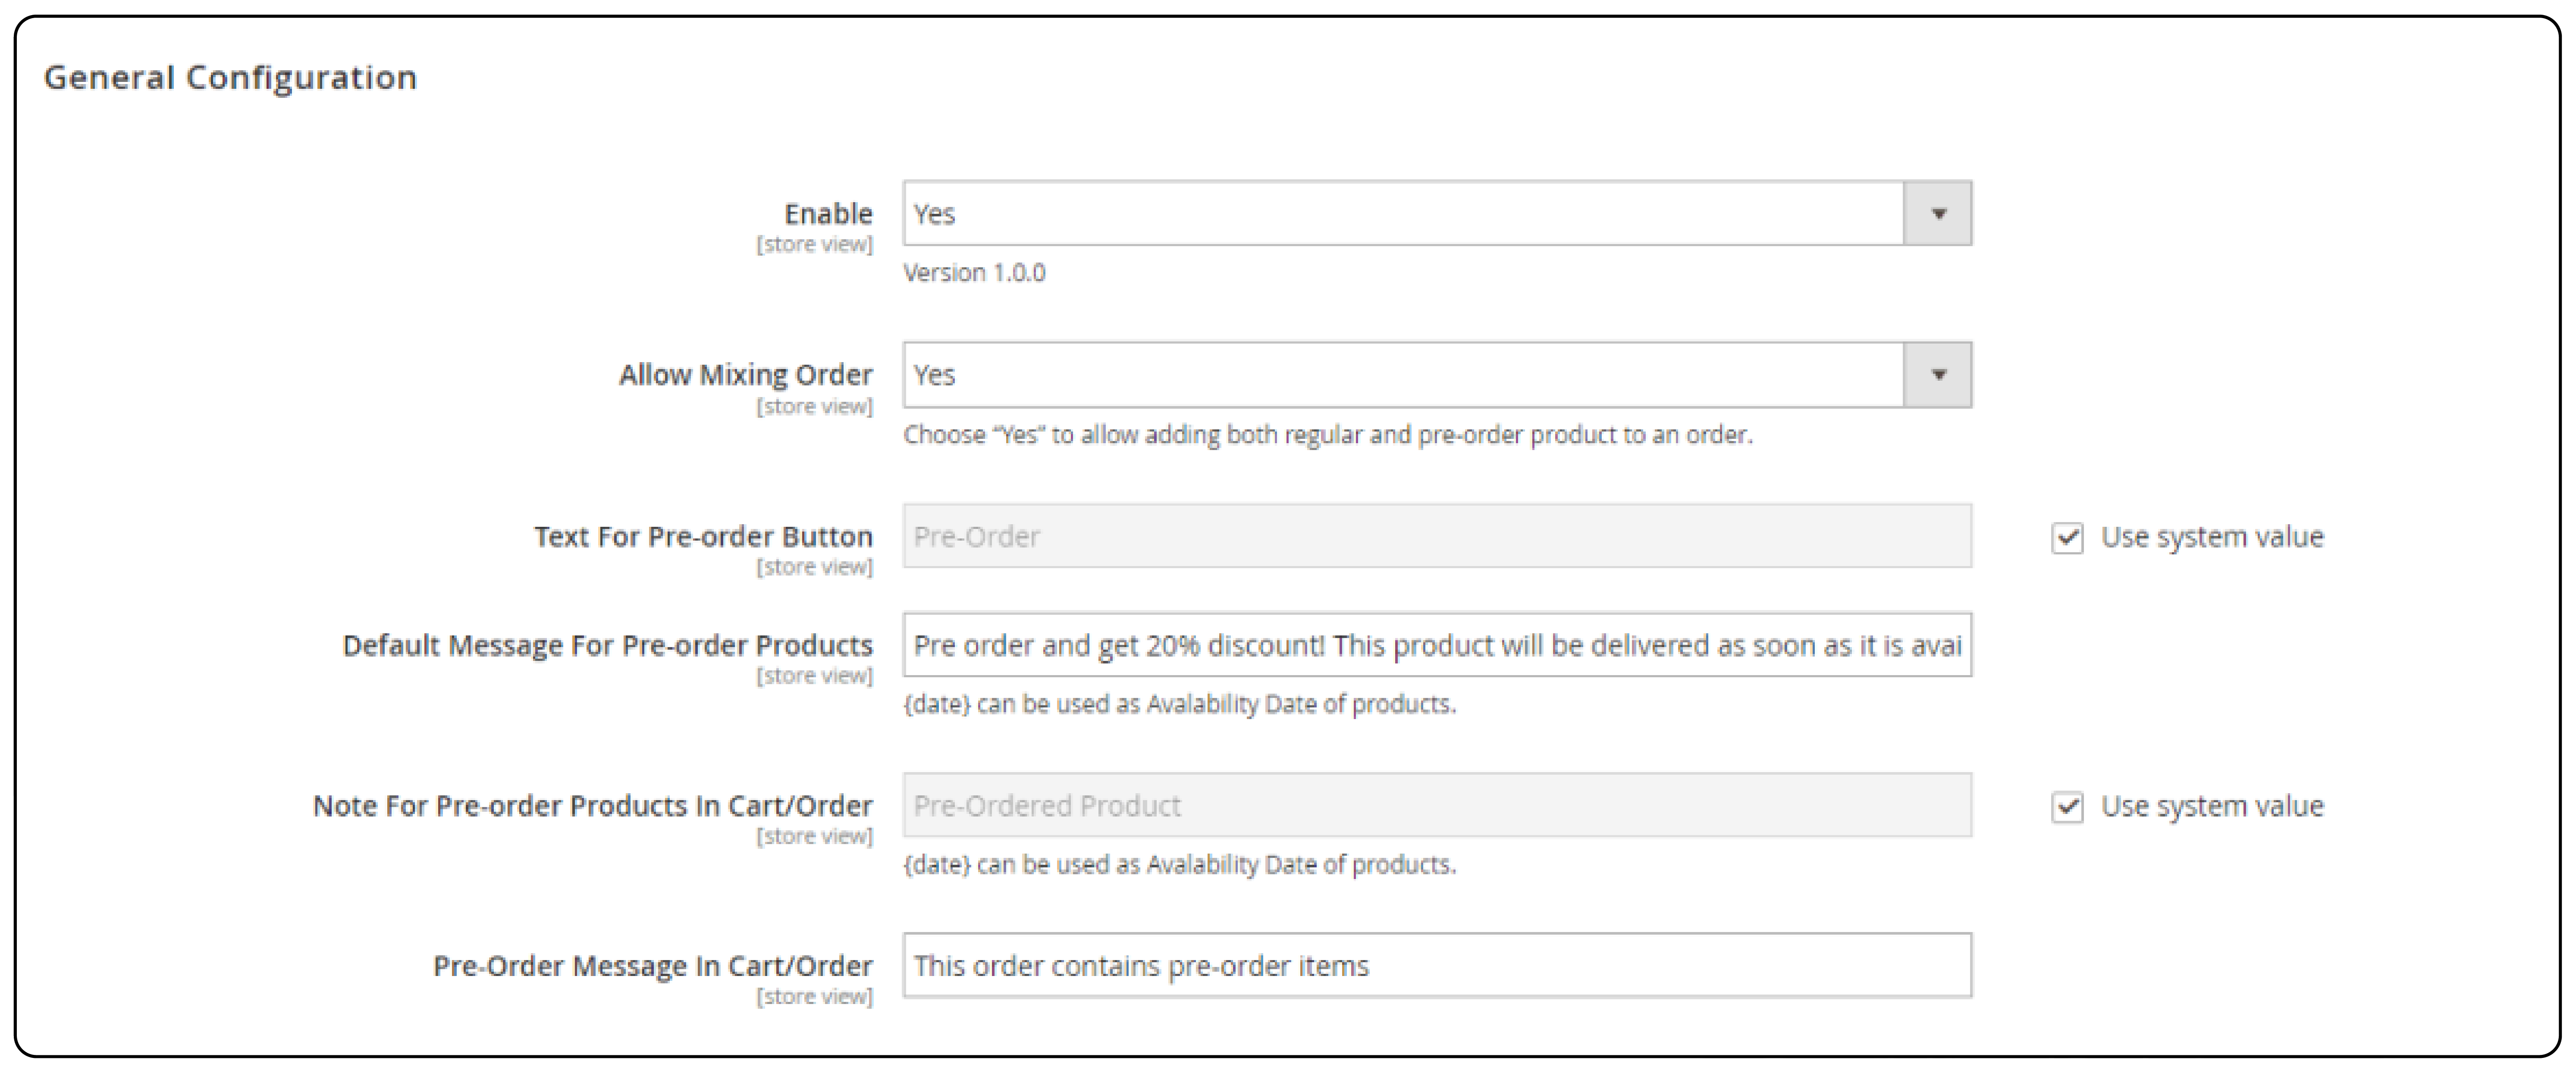 Magento 2 dashboard showing general configuration settings for Pre-Order functionality